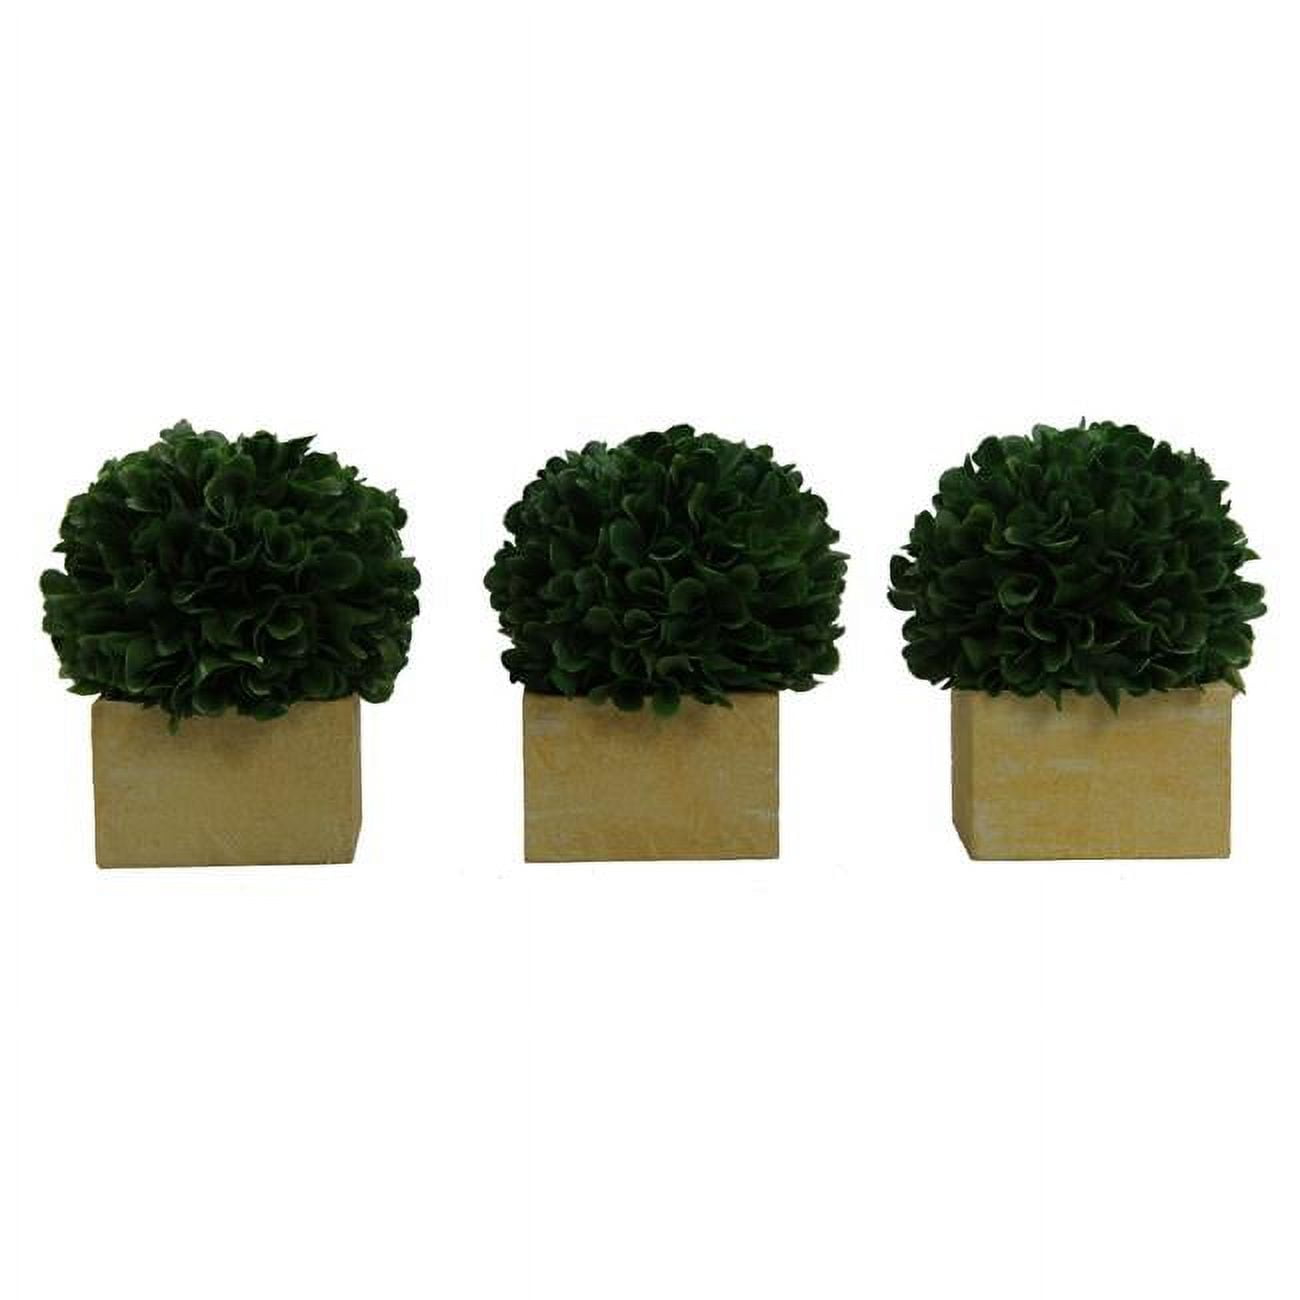 Picture of Admired By Nature ABN5P008-GRN-3 5.5 in. Faux Preserved Artificial Boxwood Ball Topiary Plant Tabletop in Pot - Set of 3